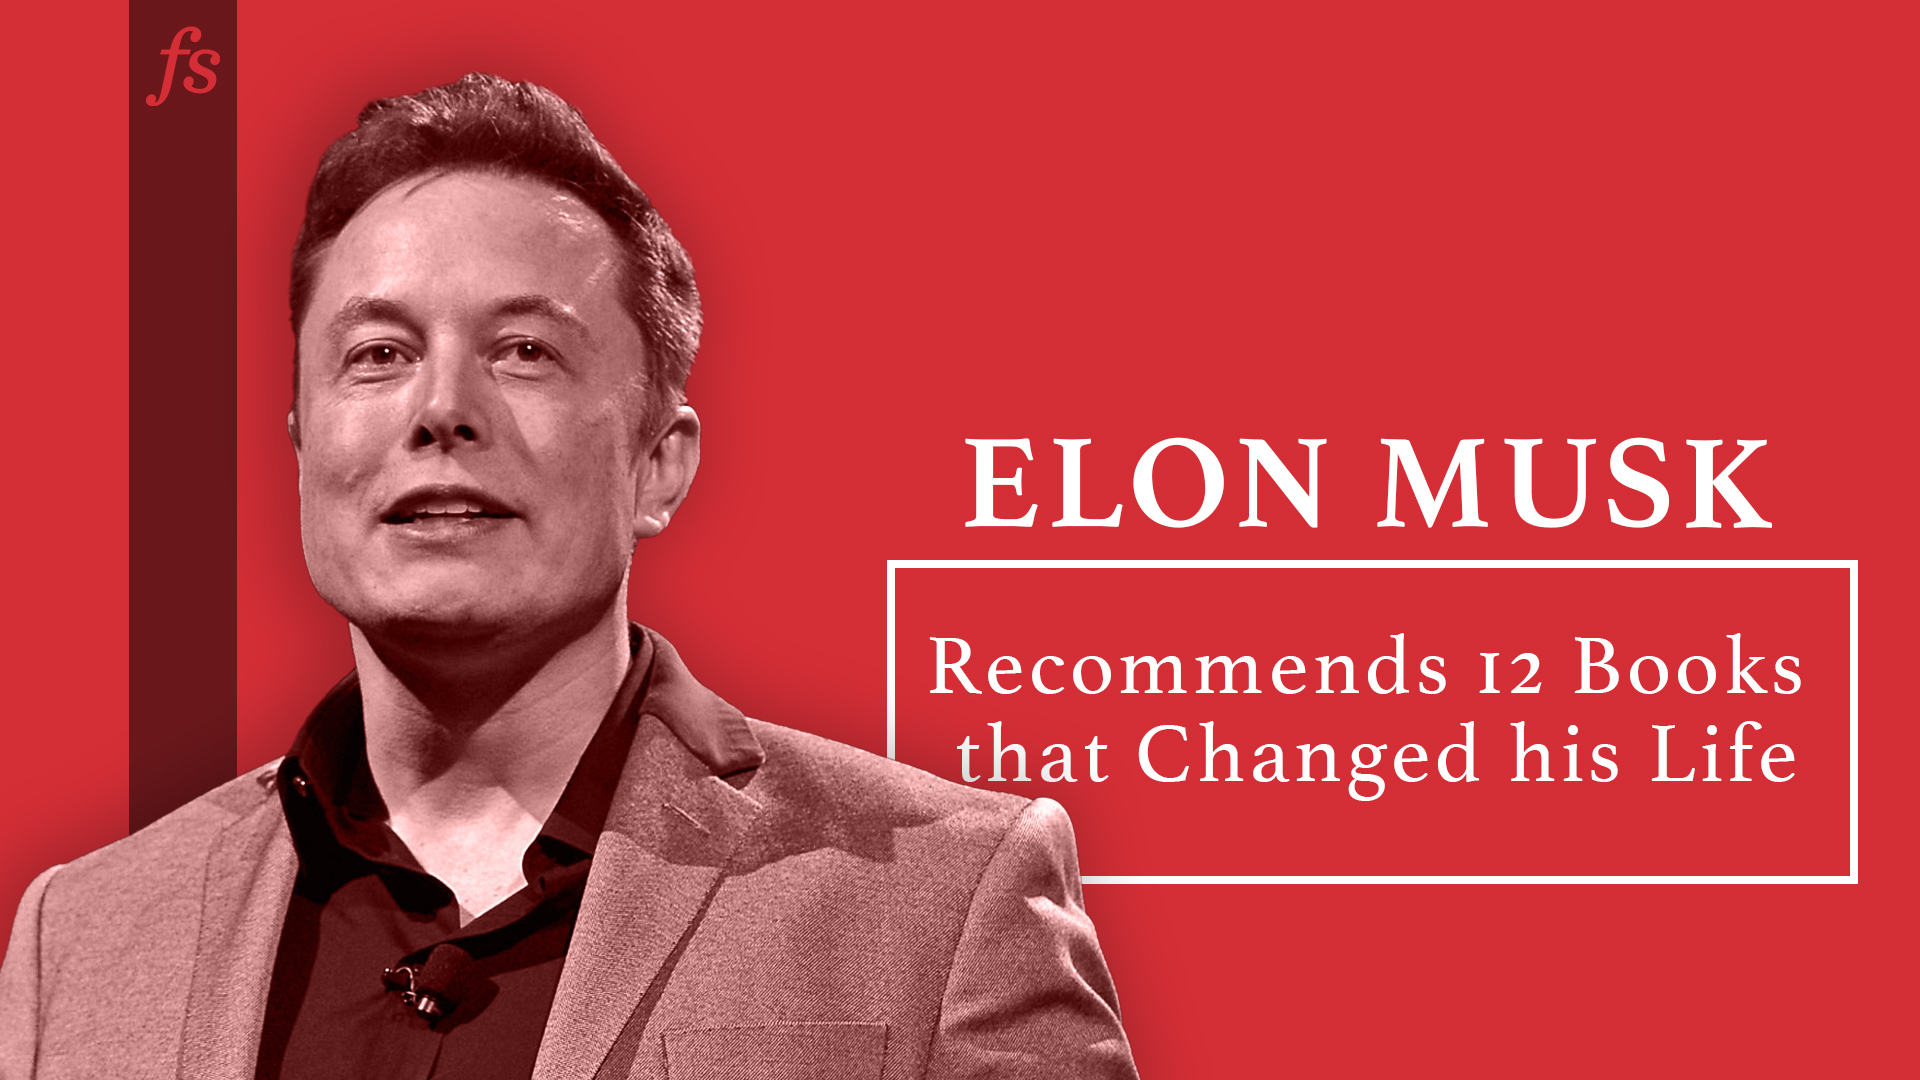 Elon Musk 12 Books that Changed his Life